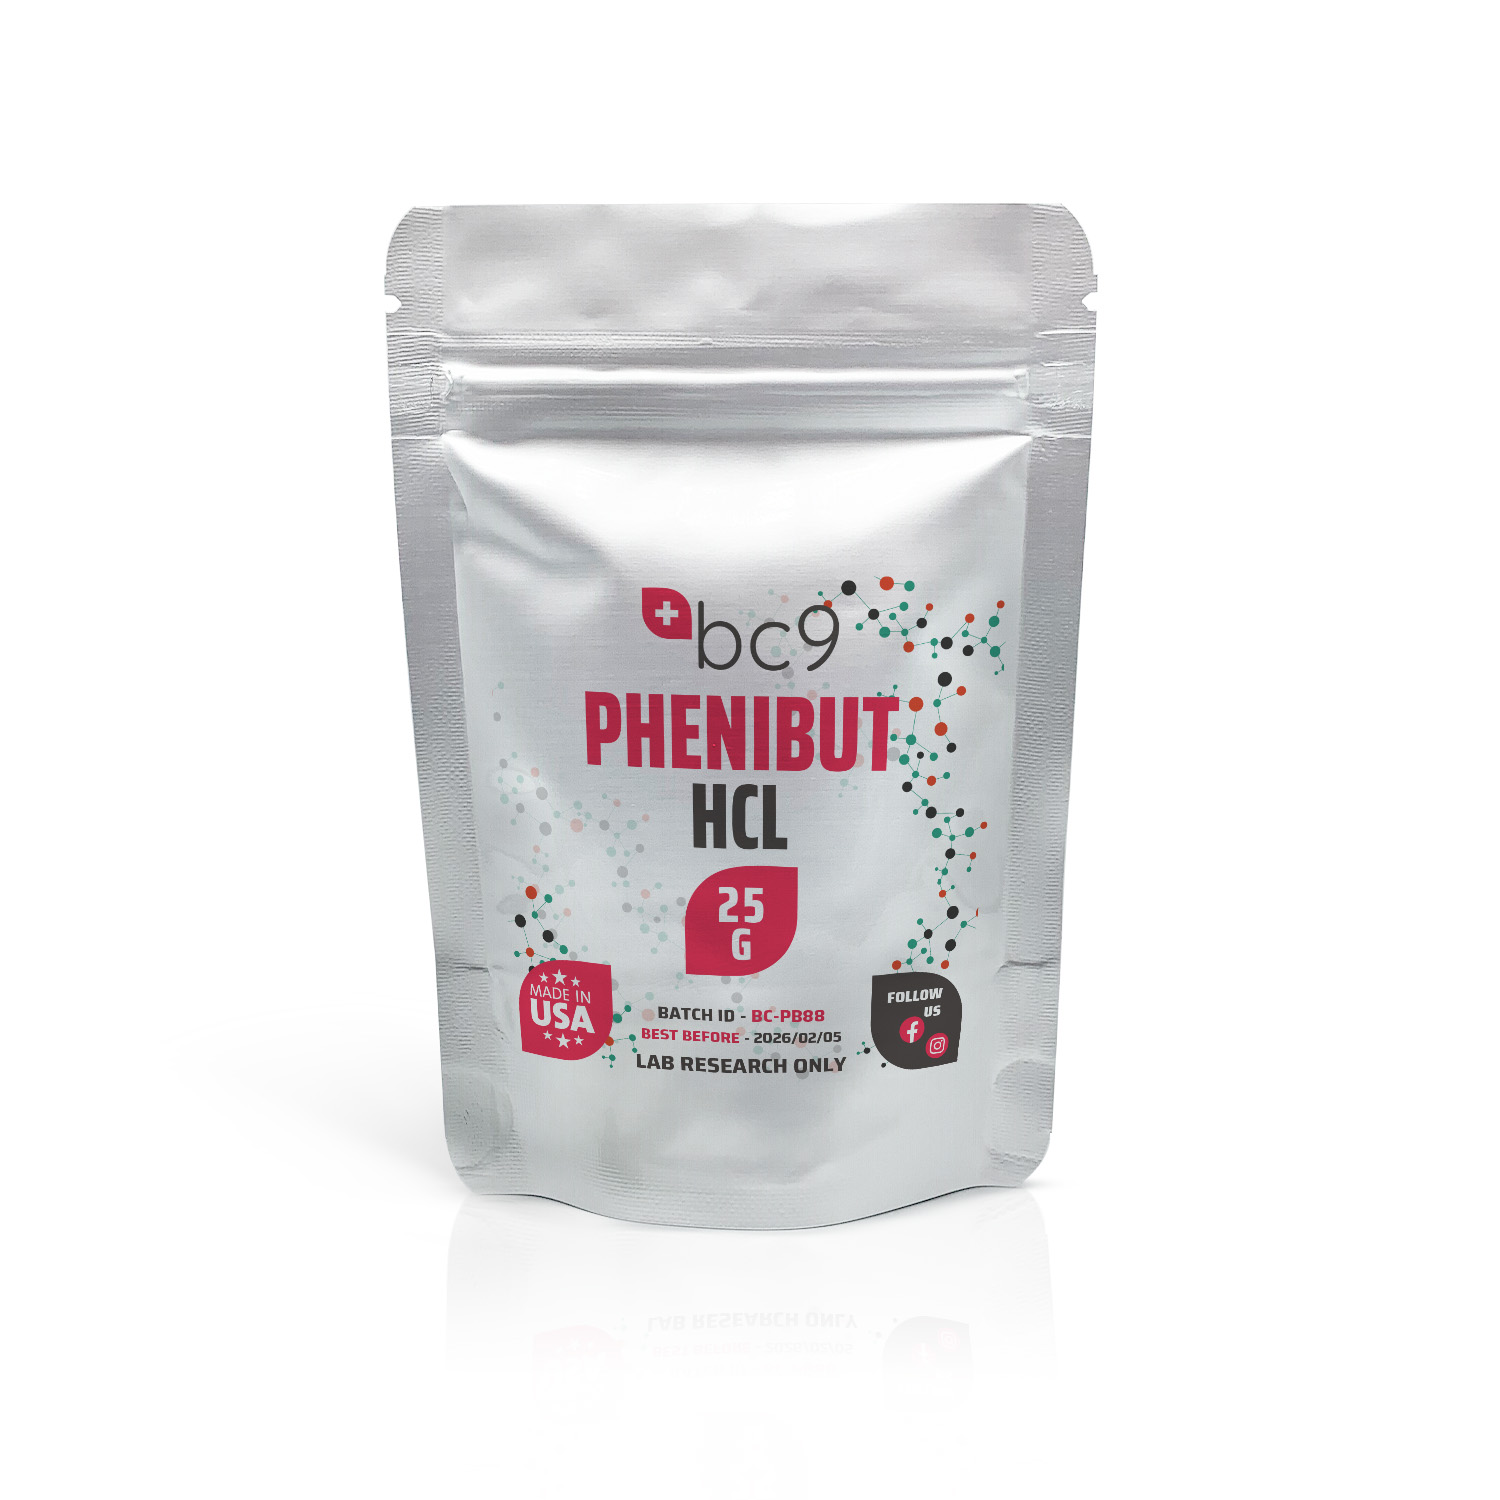 Phenibut HCL Powder For Sale | Fast Shipping | BC9.org